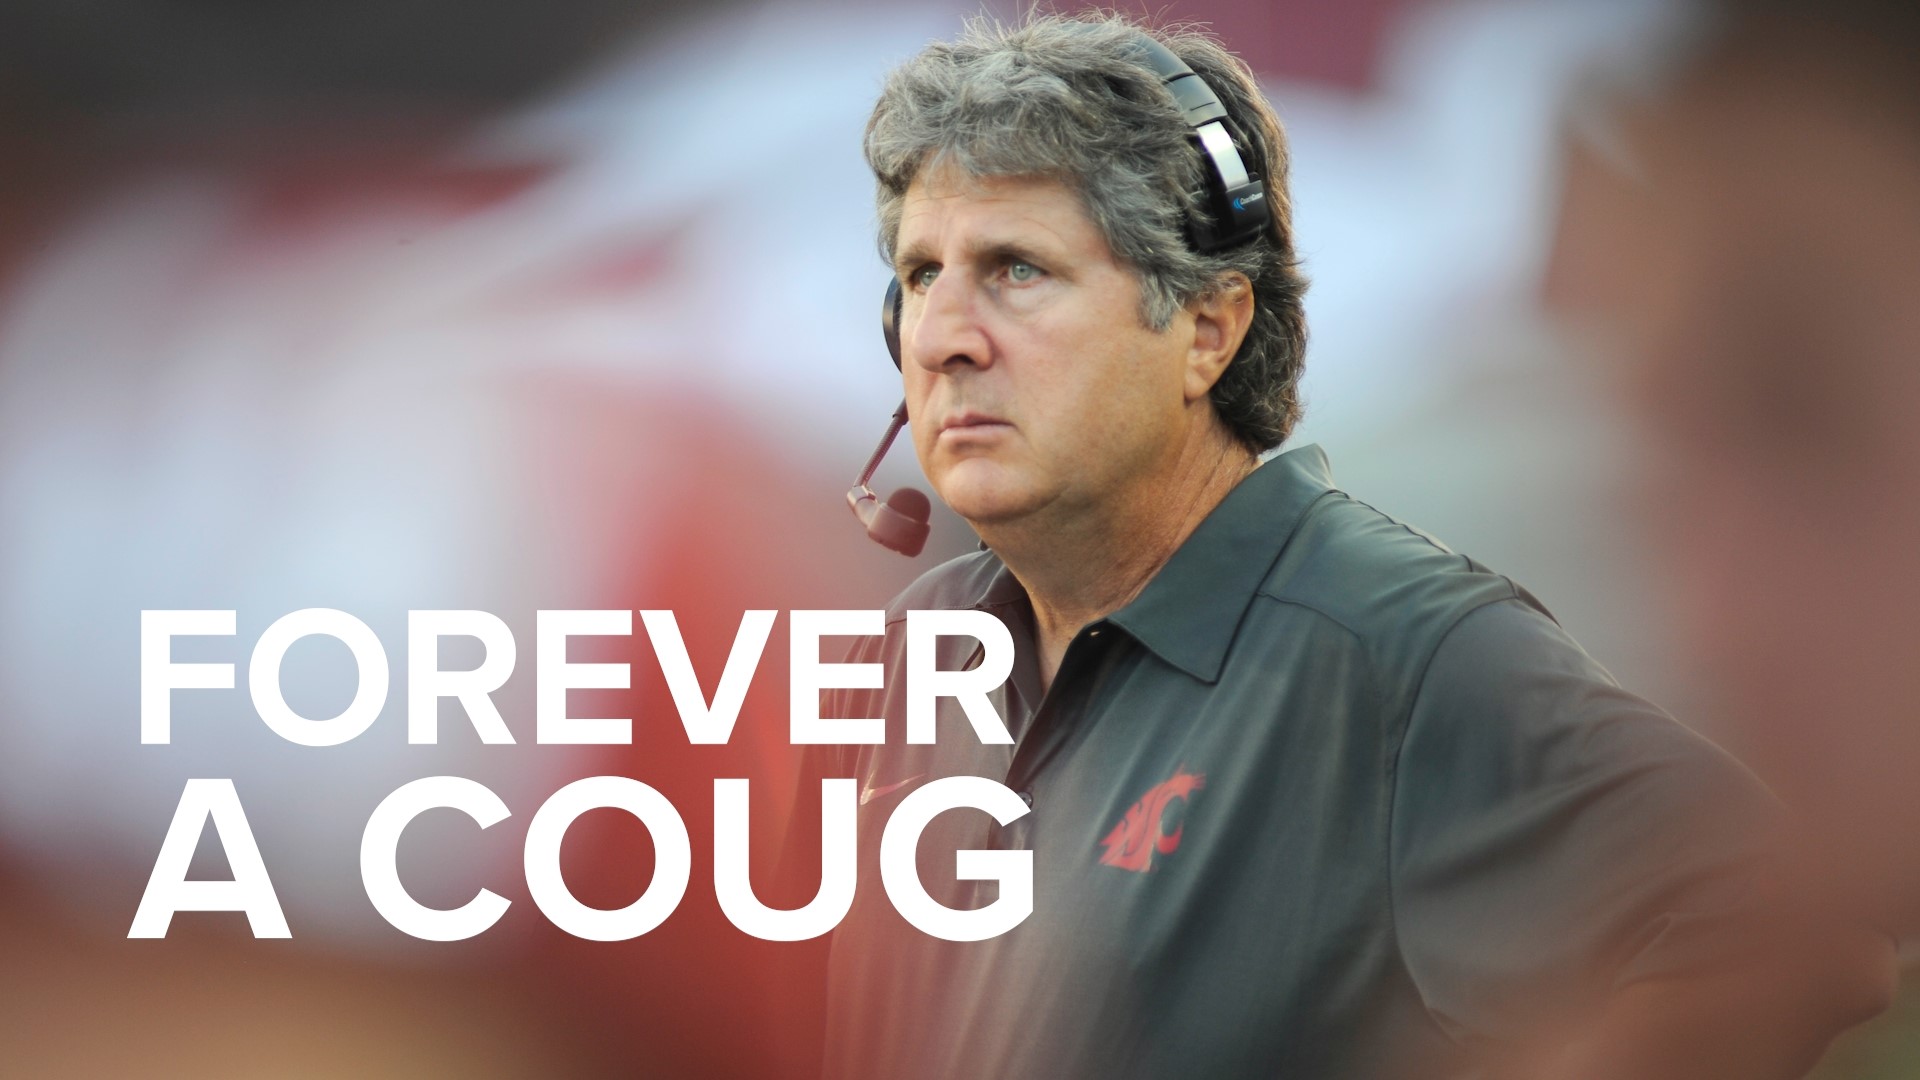 Mike Leach passed away following complications from a heart condition. He is being remembered for his time with Washington State University.